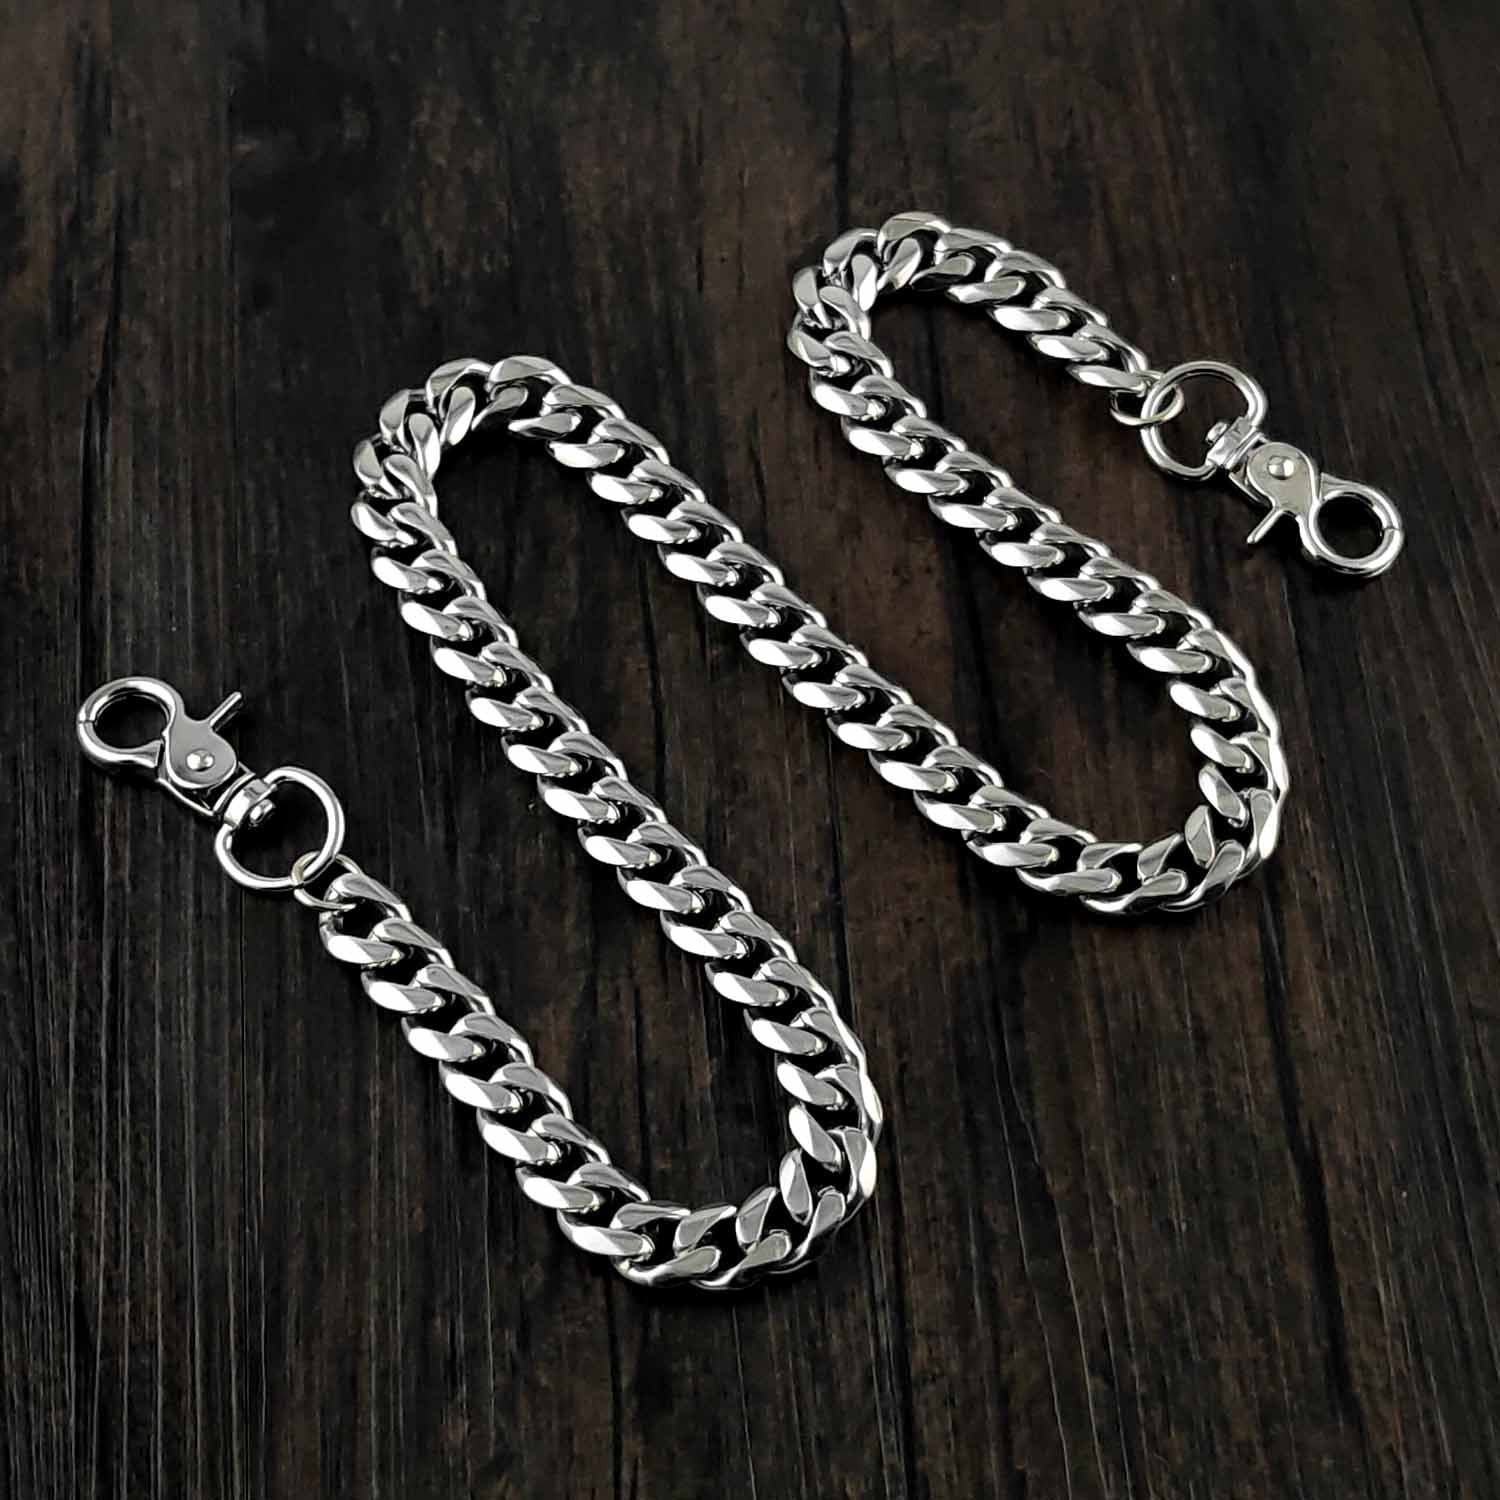 16'' SOLID STAINLESS STEEL BIKER SILVER WALLET CHAIN LONG PANTS CHAIN